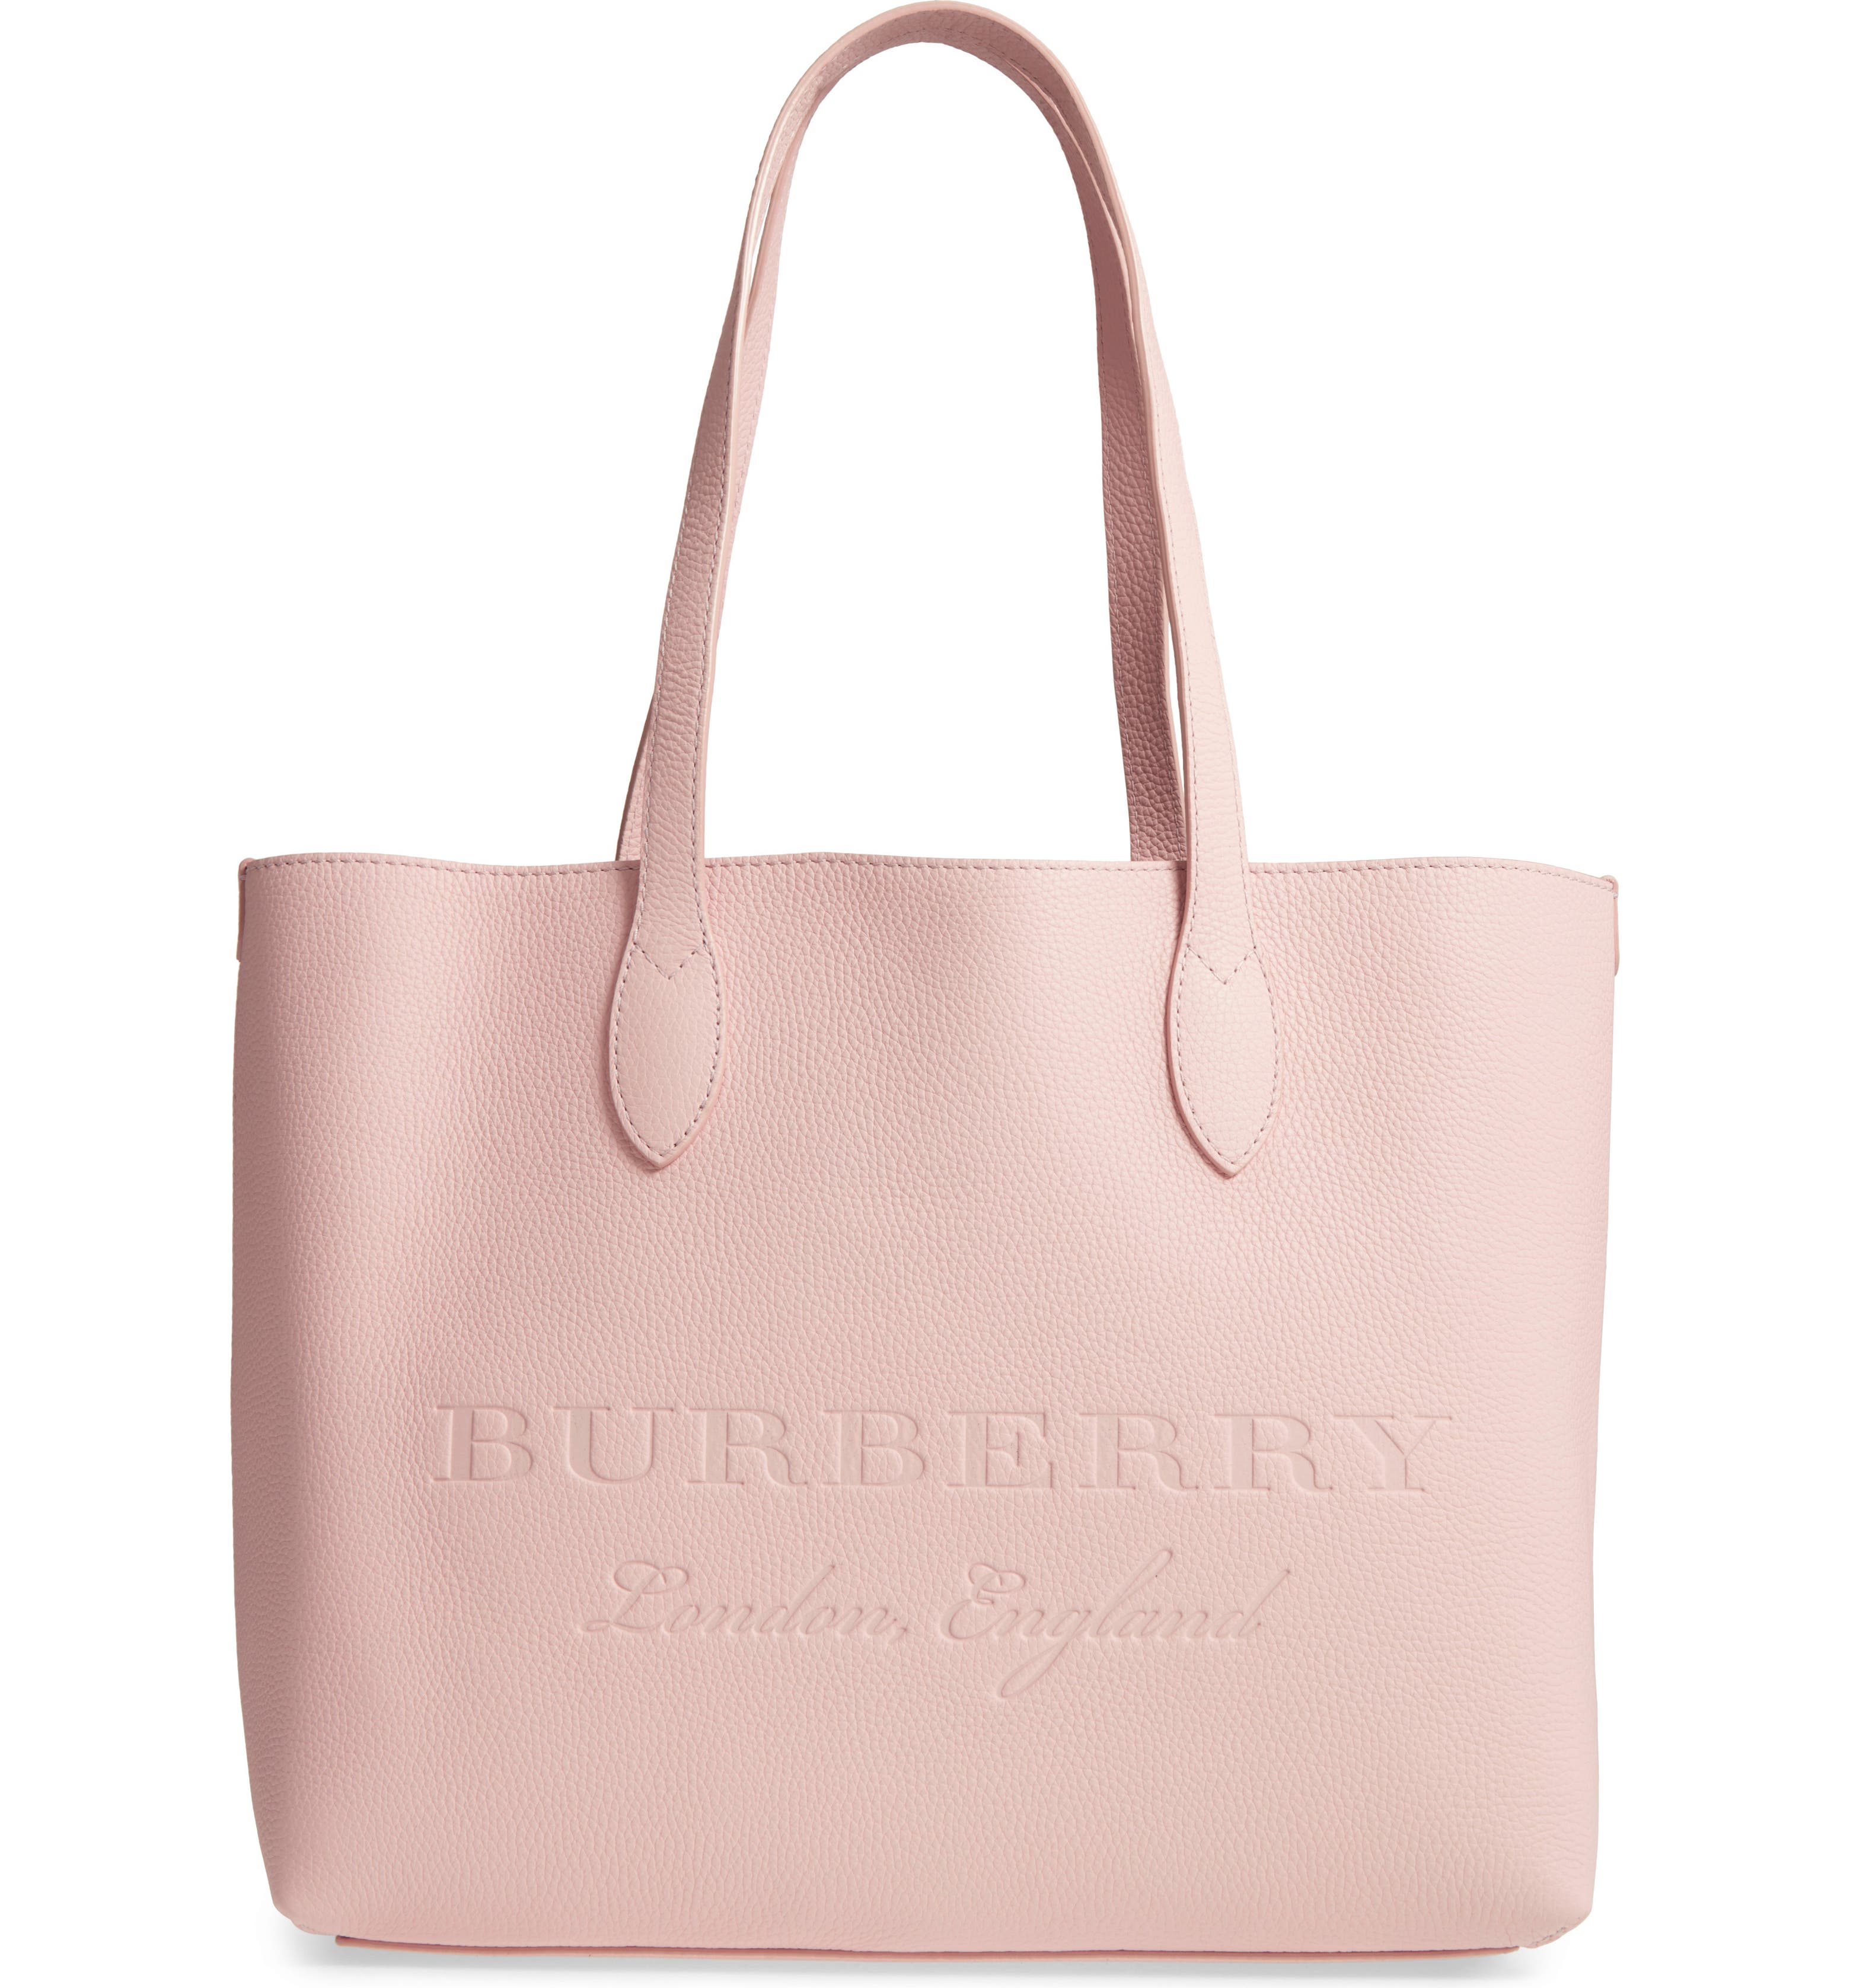 Burberry Remington Leather Tote | Nordstrom